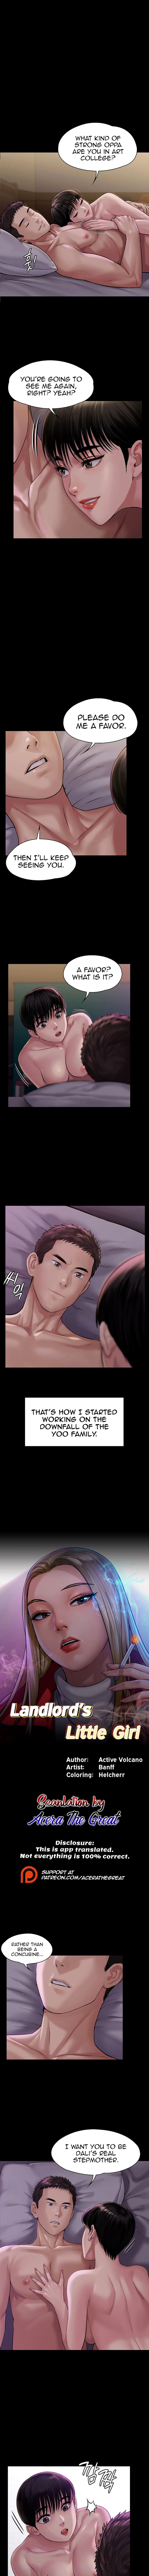 Panel Image 1 for chapter 164 of manhwa Queen Bee on read.oppai.stream